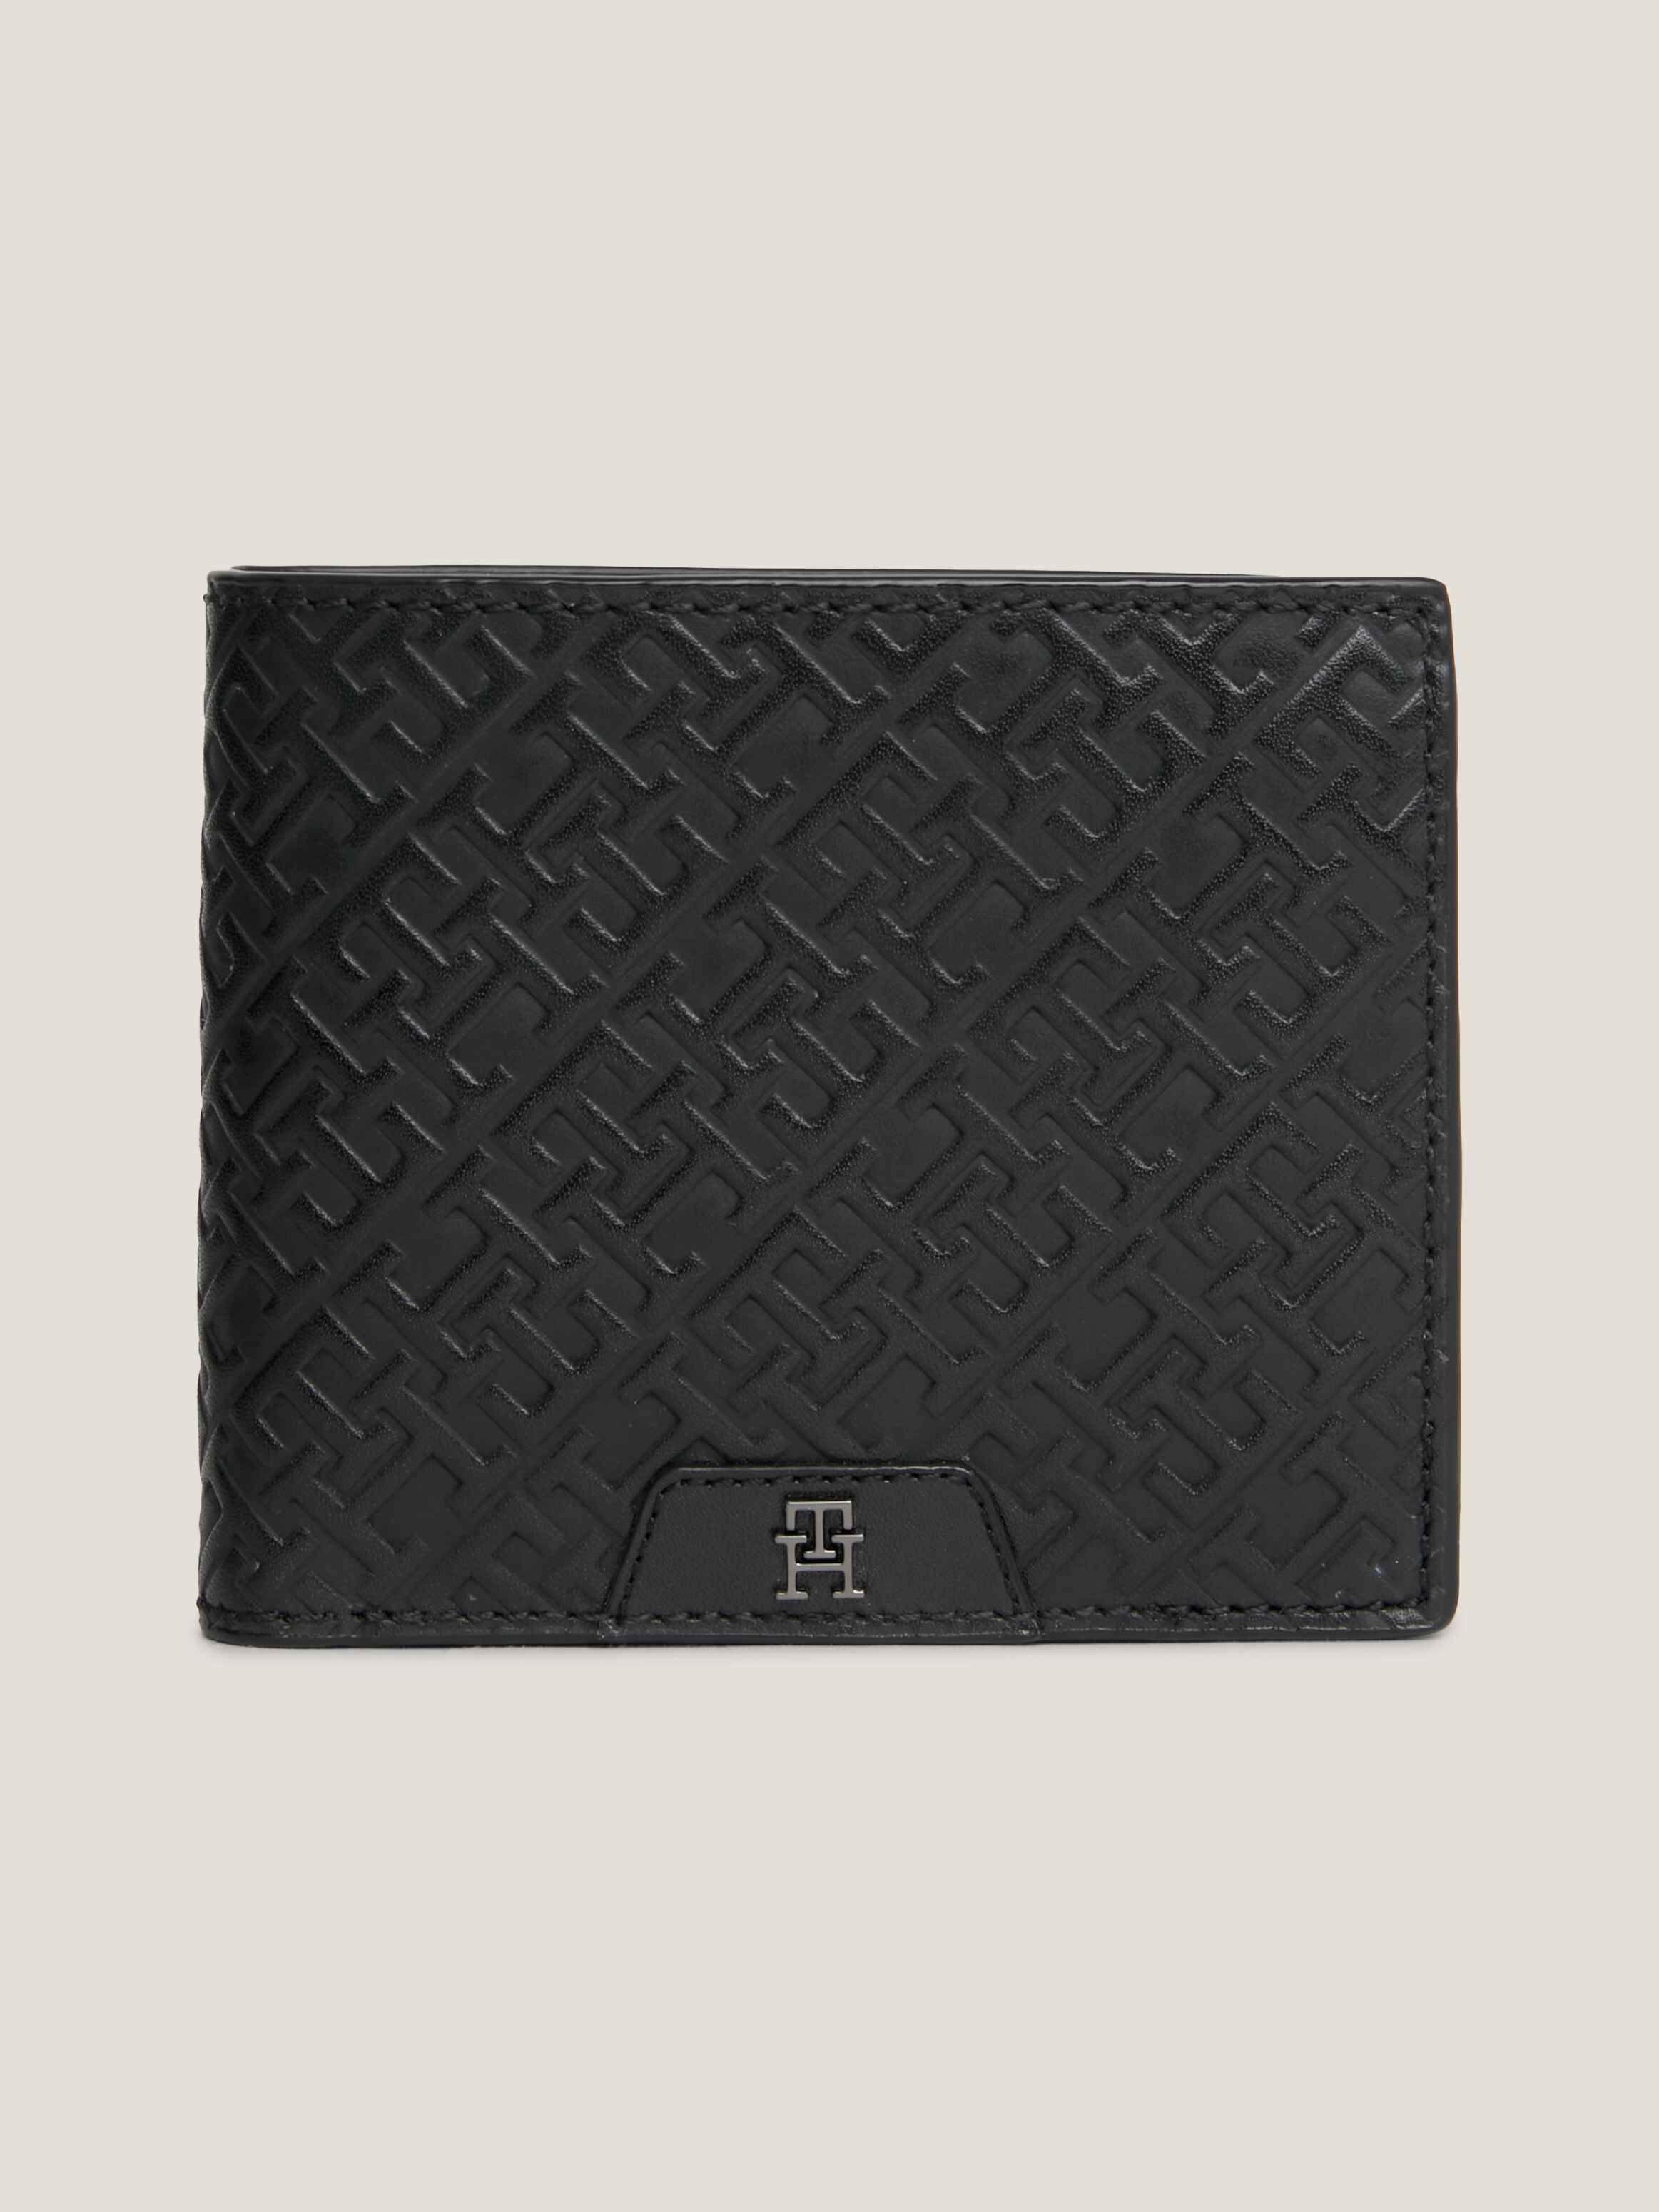 TH Monogram Card And Coin Wallet | Tommy Hilfiger